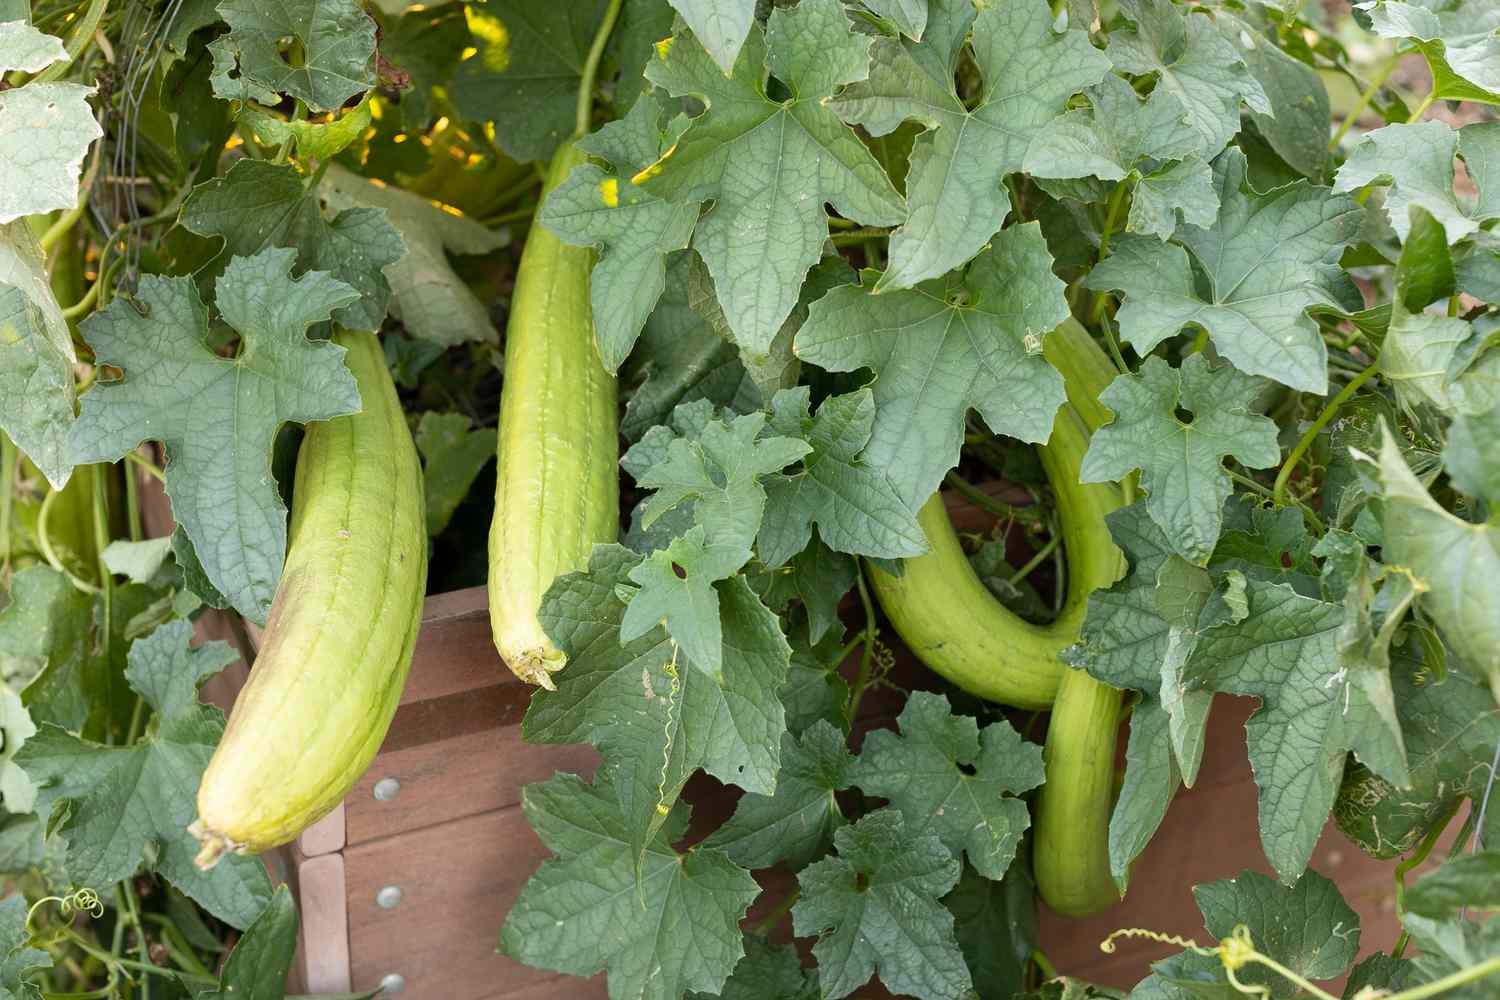 Luffa plant with light green gourds hanging on vines and leaves